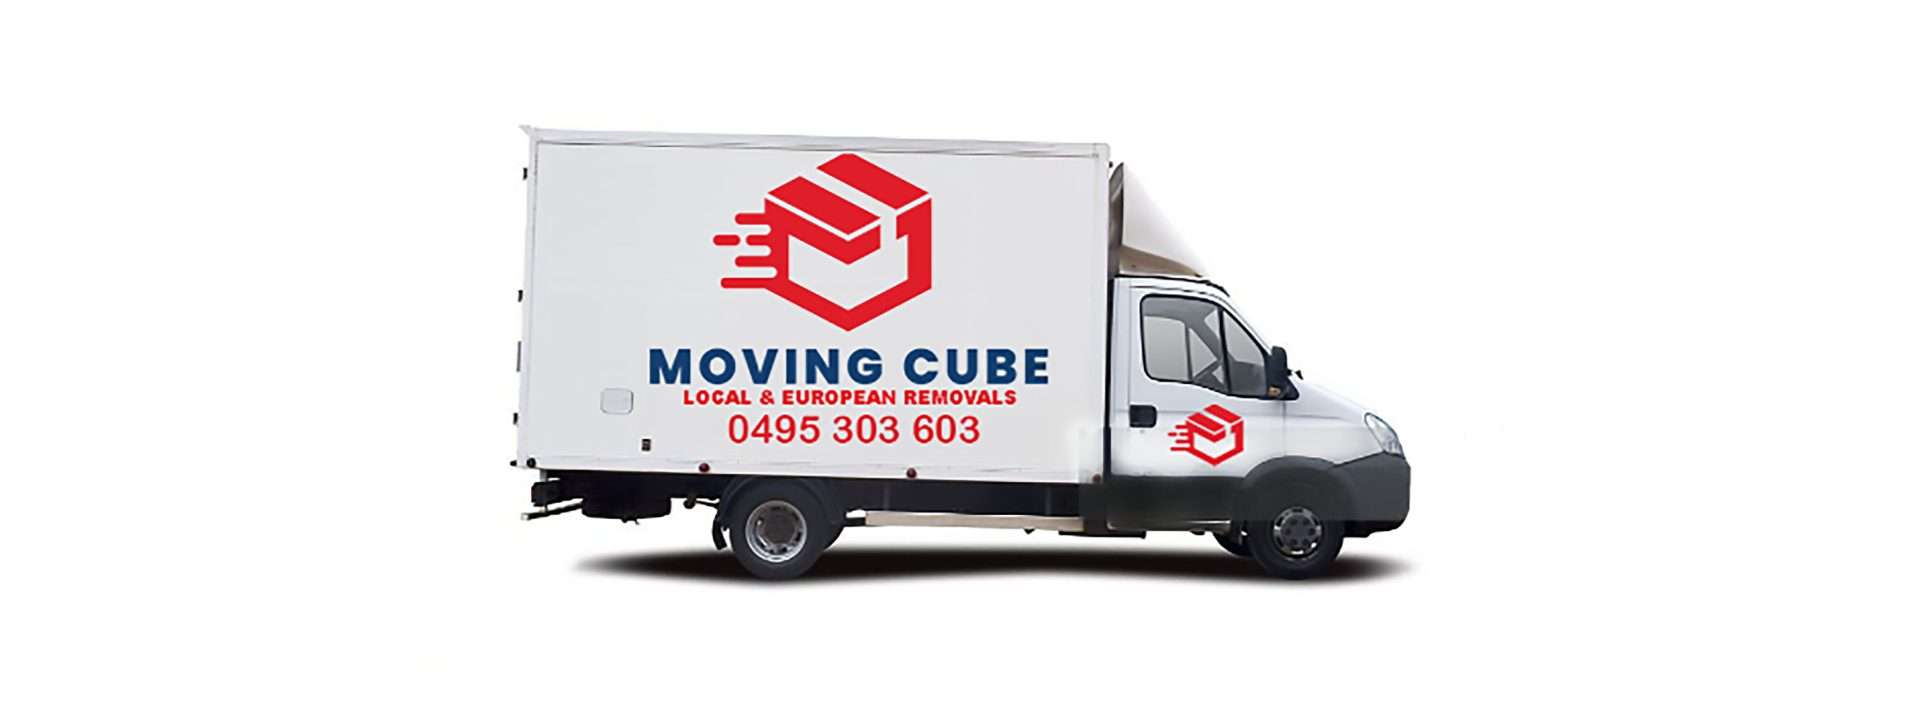 ‘MOVING CUBE

LOCAL & EUROPEAN REMOVALS

0495 303 603